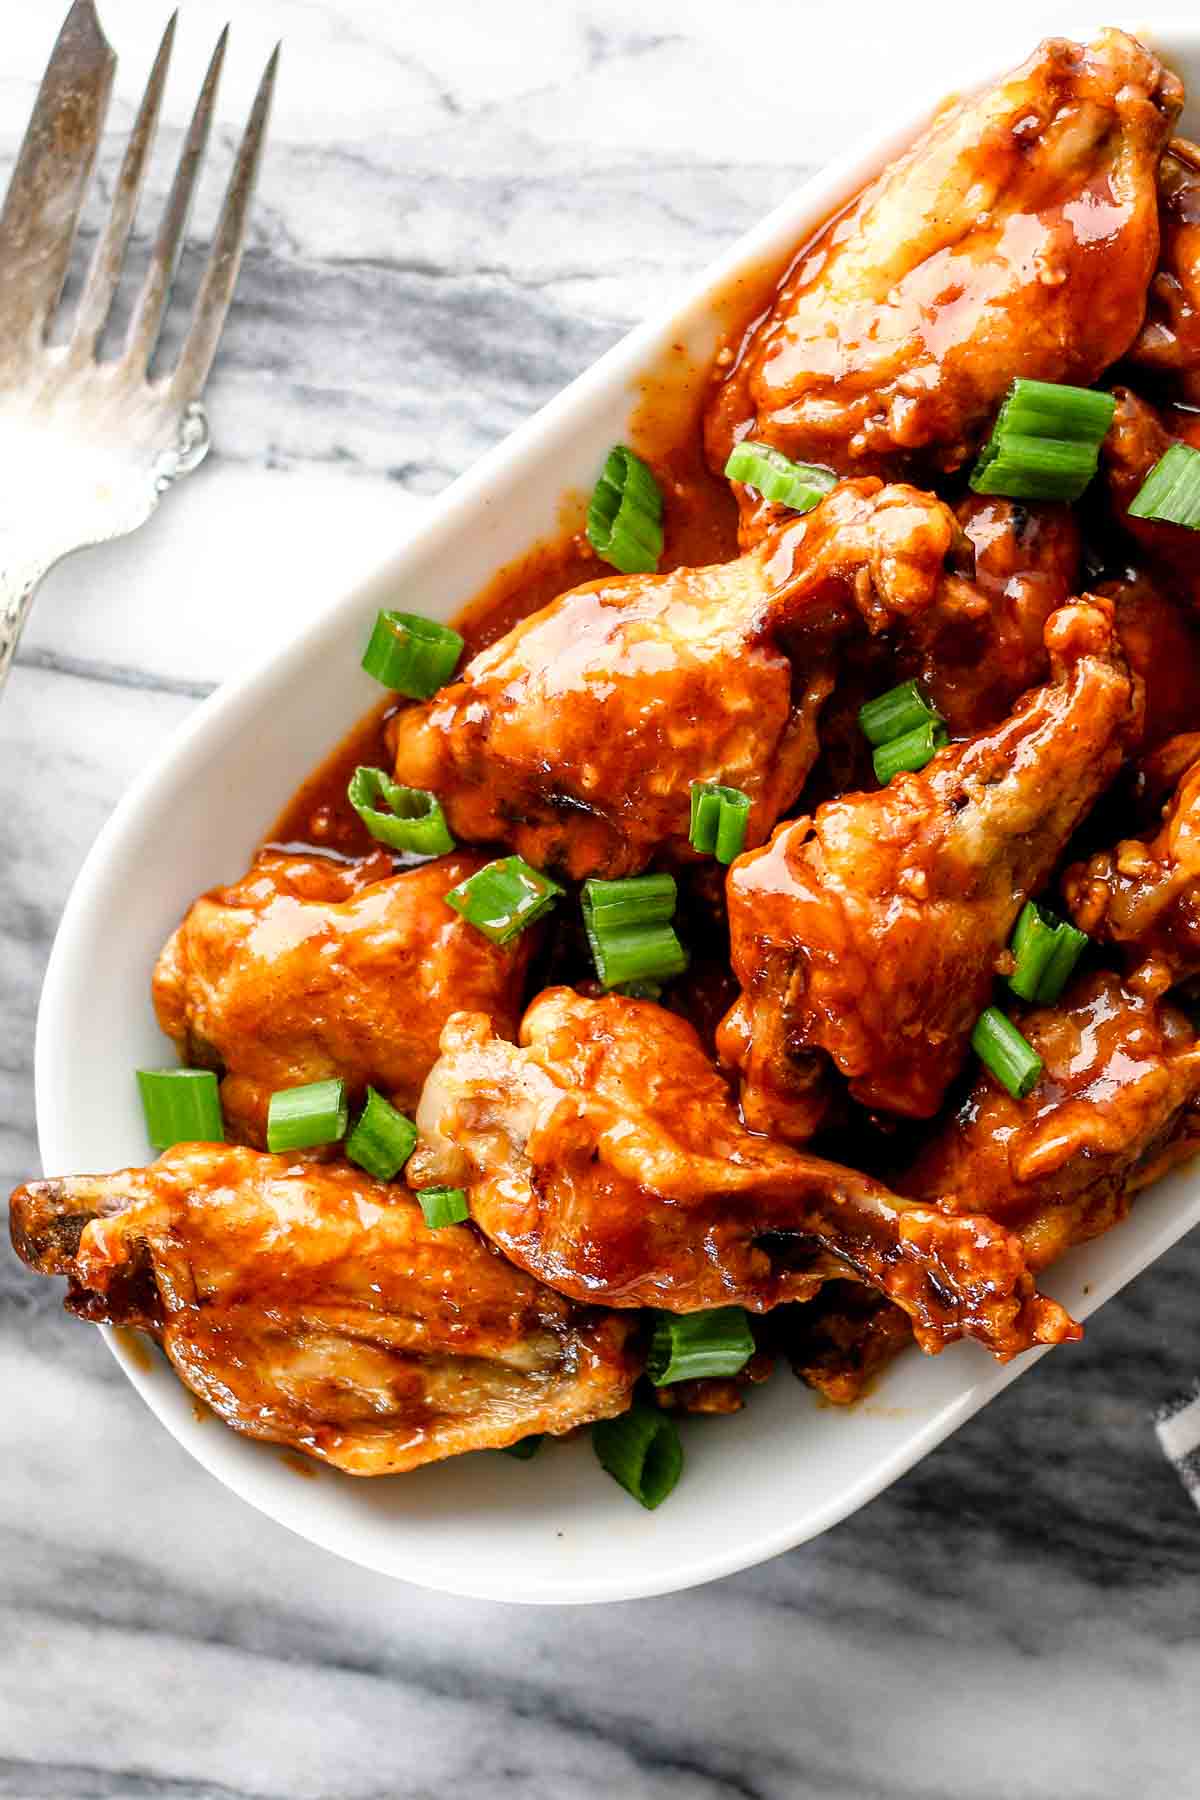 A platter of gluten free chicken wings in a barbecue sauce garnished with green onion.